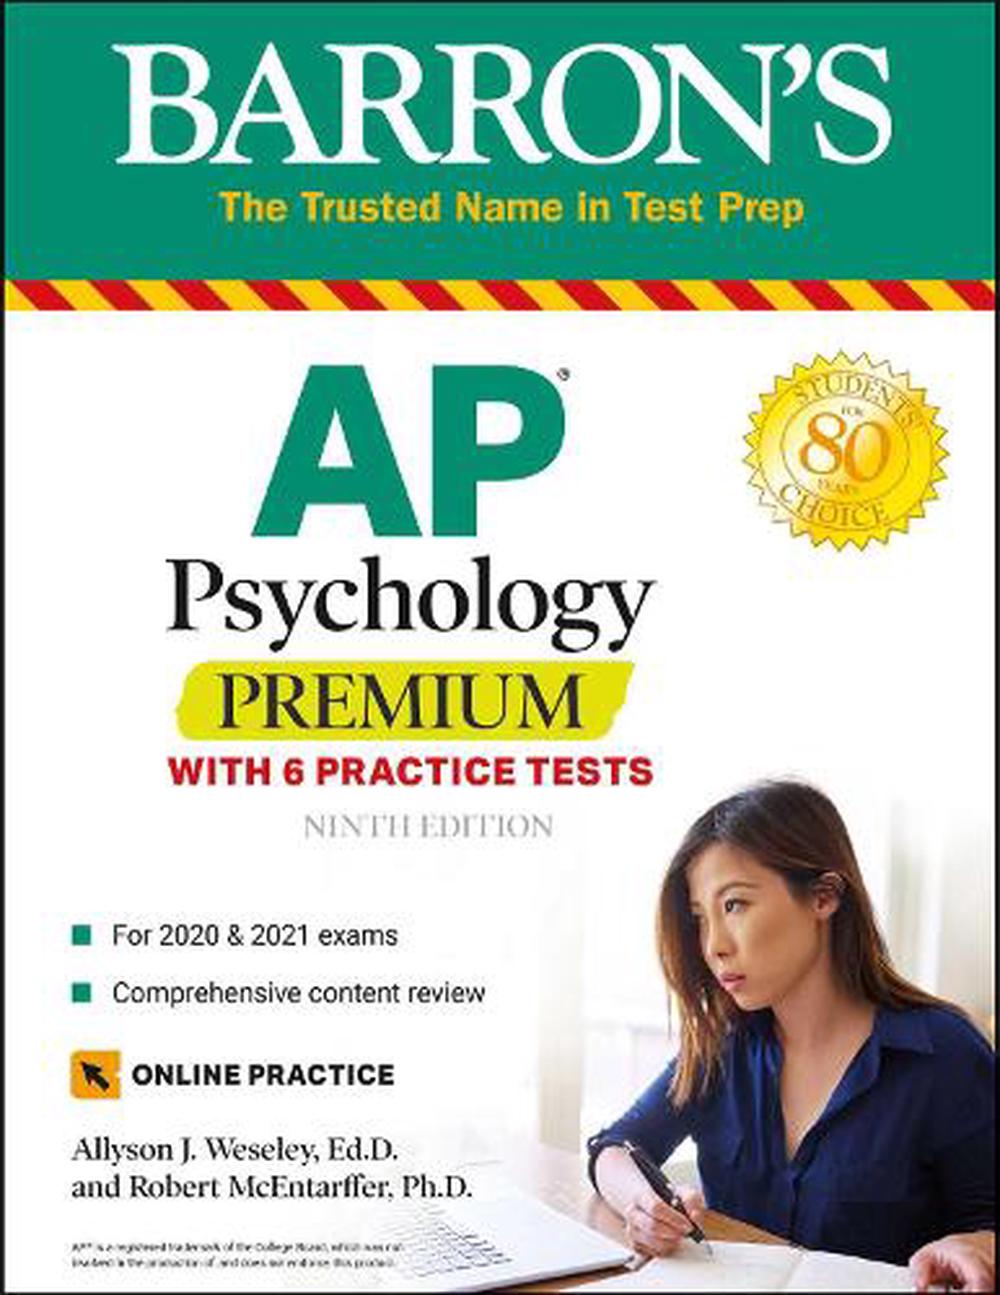 AP Psychology Premium With 6 Practice Tests by Allyson J. Weseley